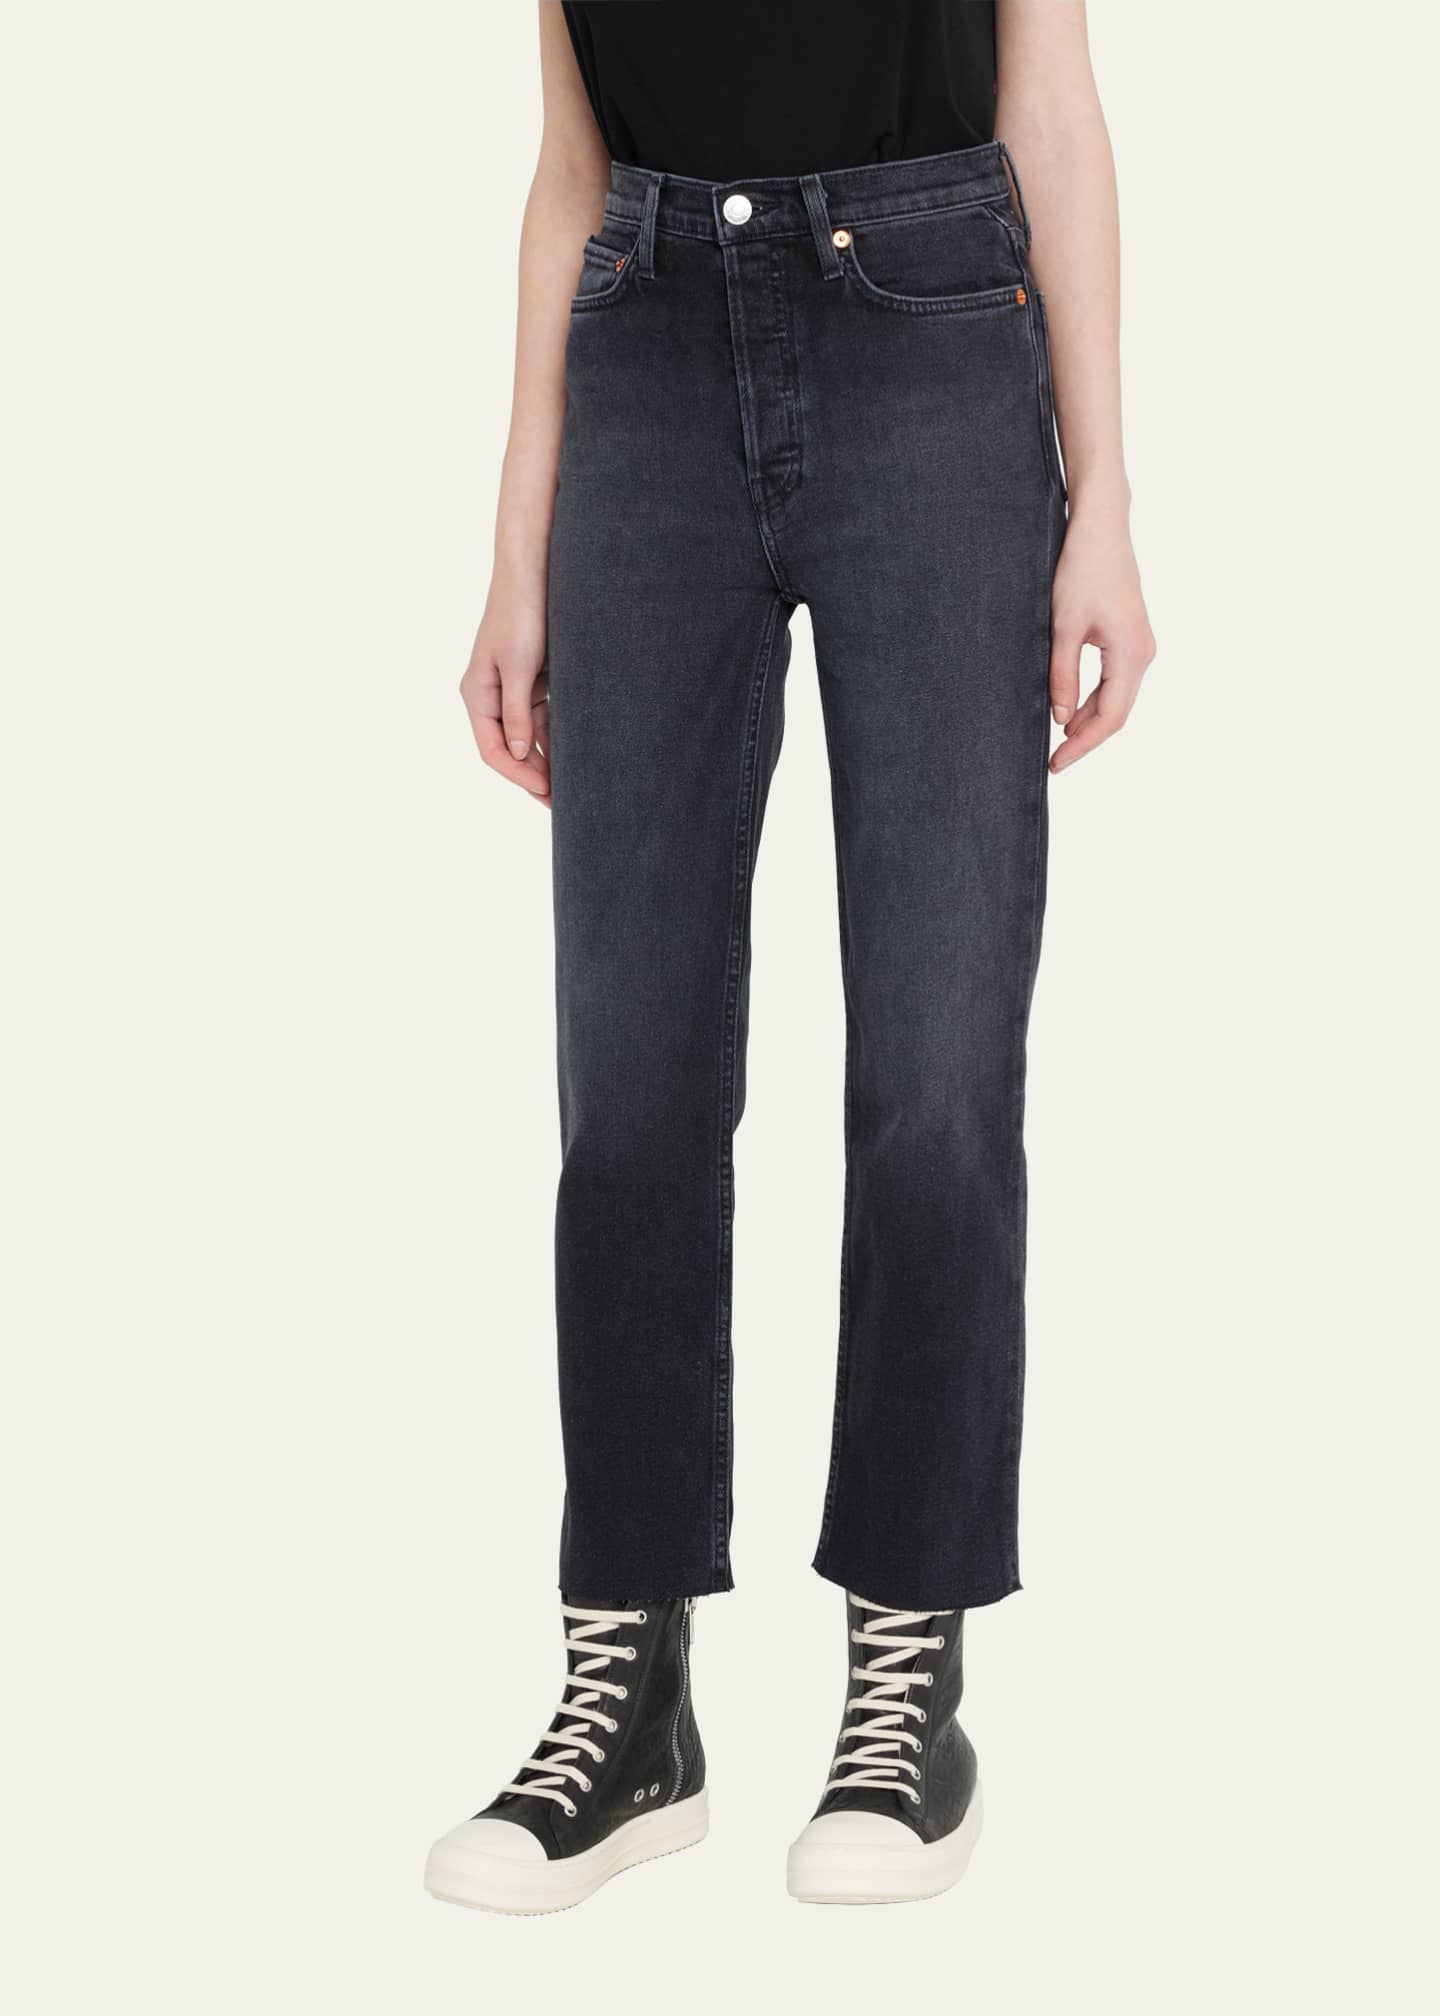 RE/DONE 70s Stovepipe Distressed Jeans - Bergdorf Goodman